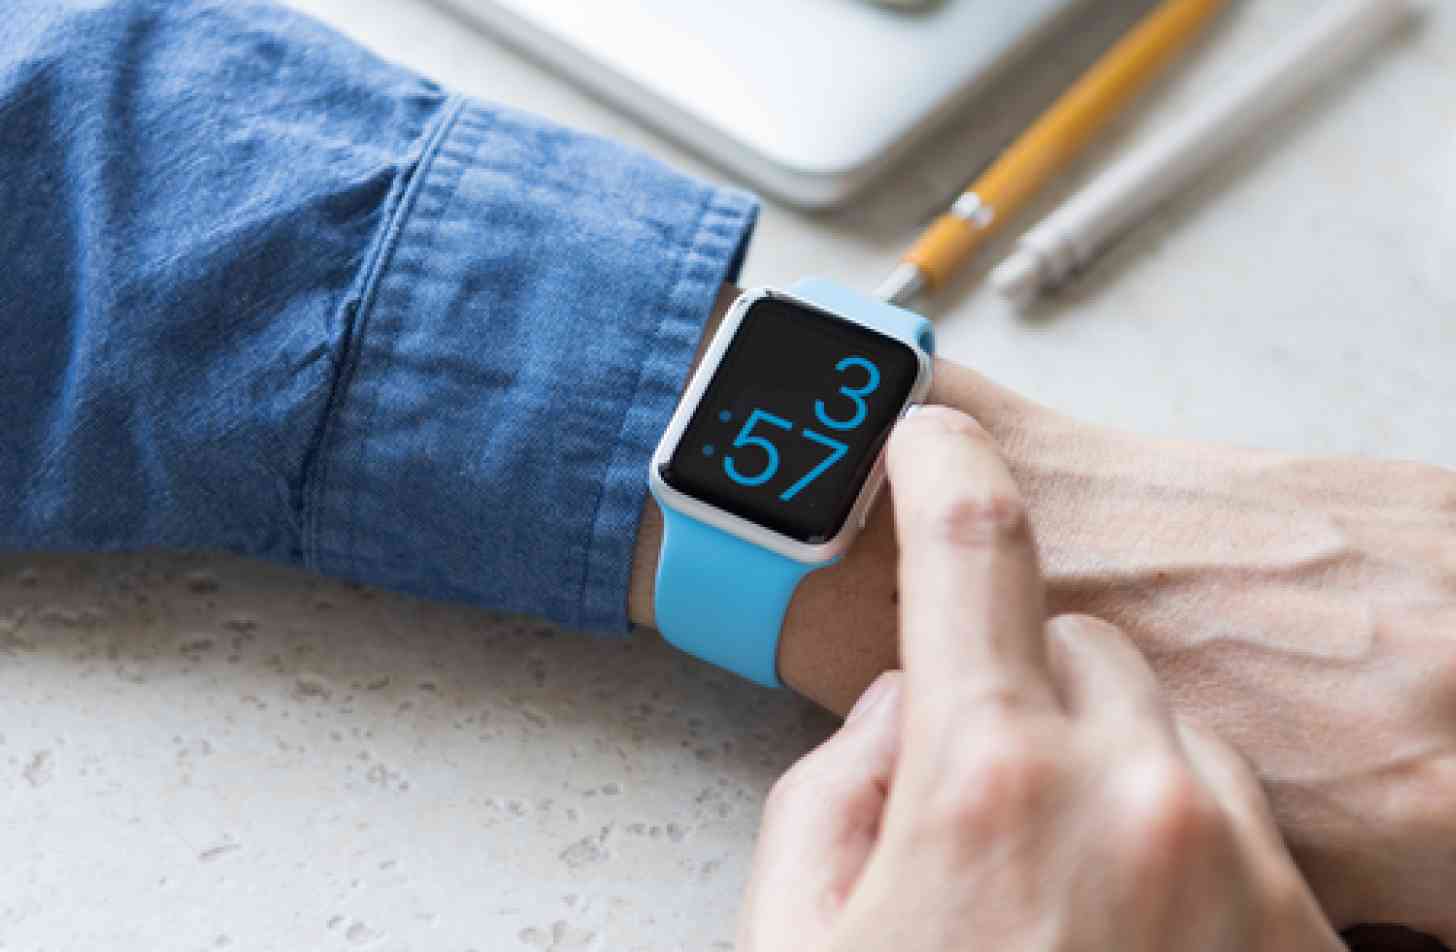 Apple has filed for smart bands that will link with the Apple Watch